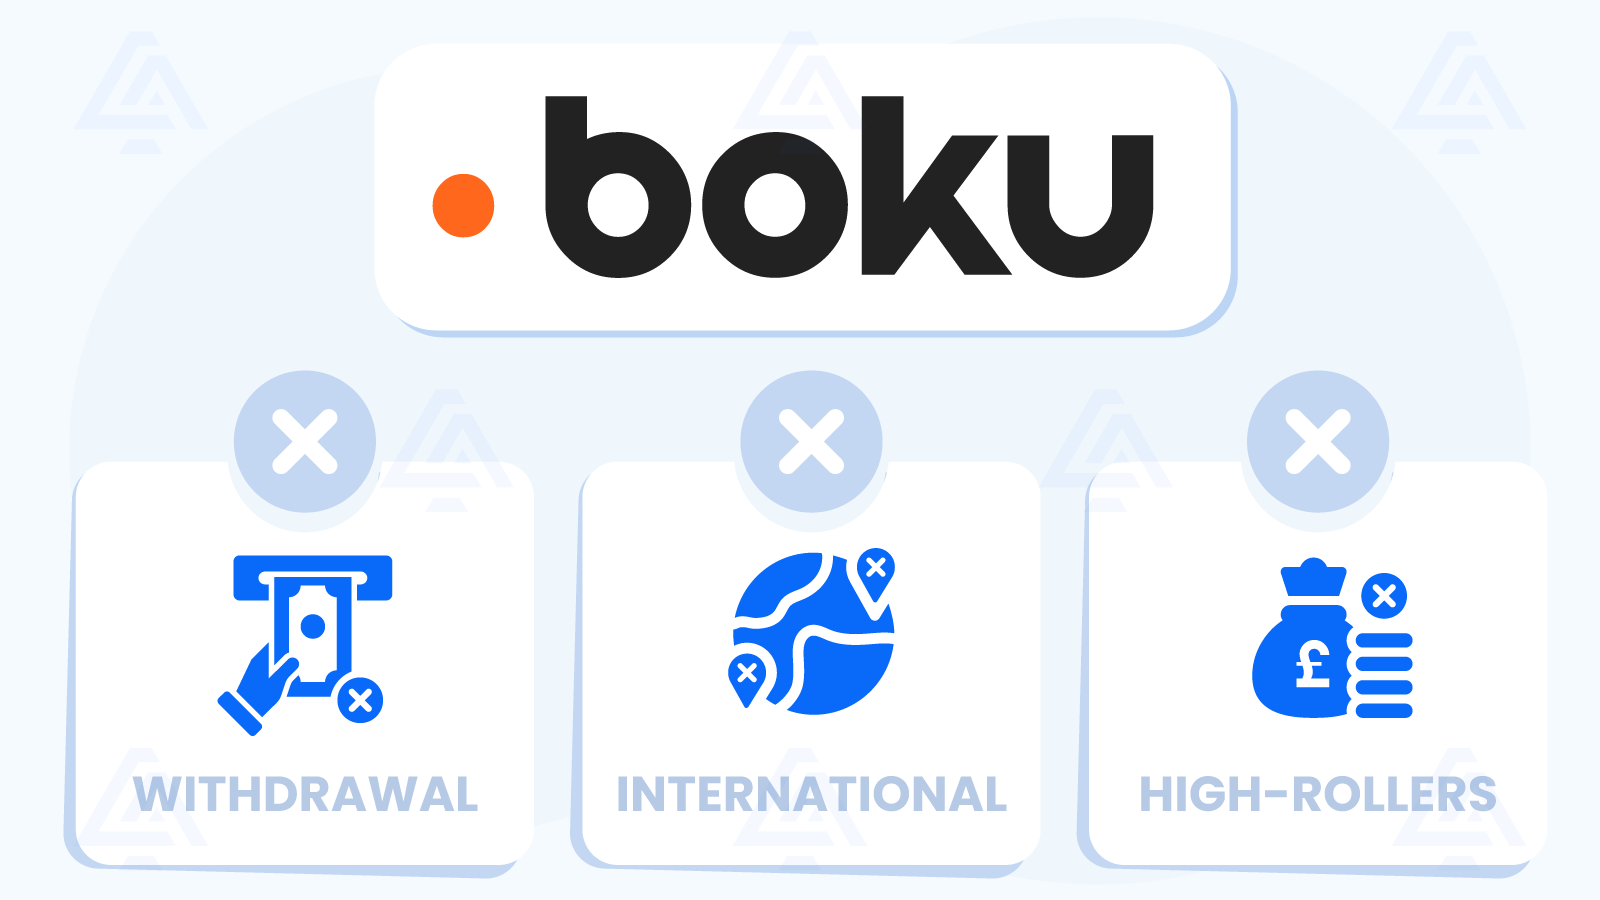 Limitations to Using Boku as a Payment Method